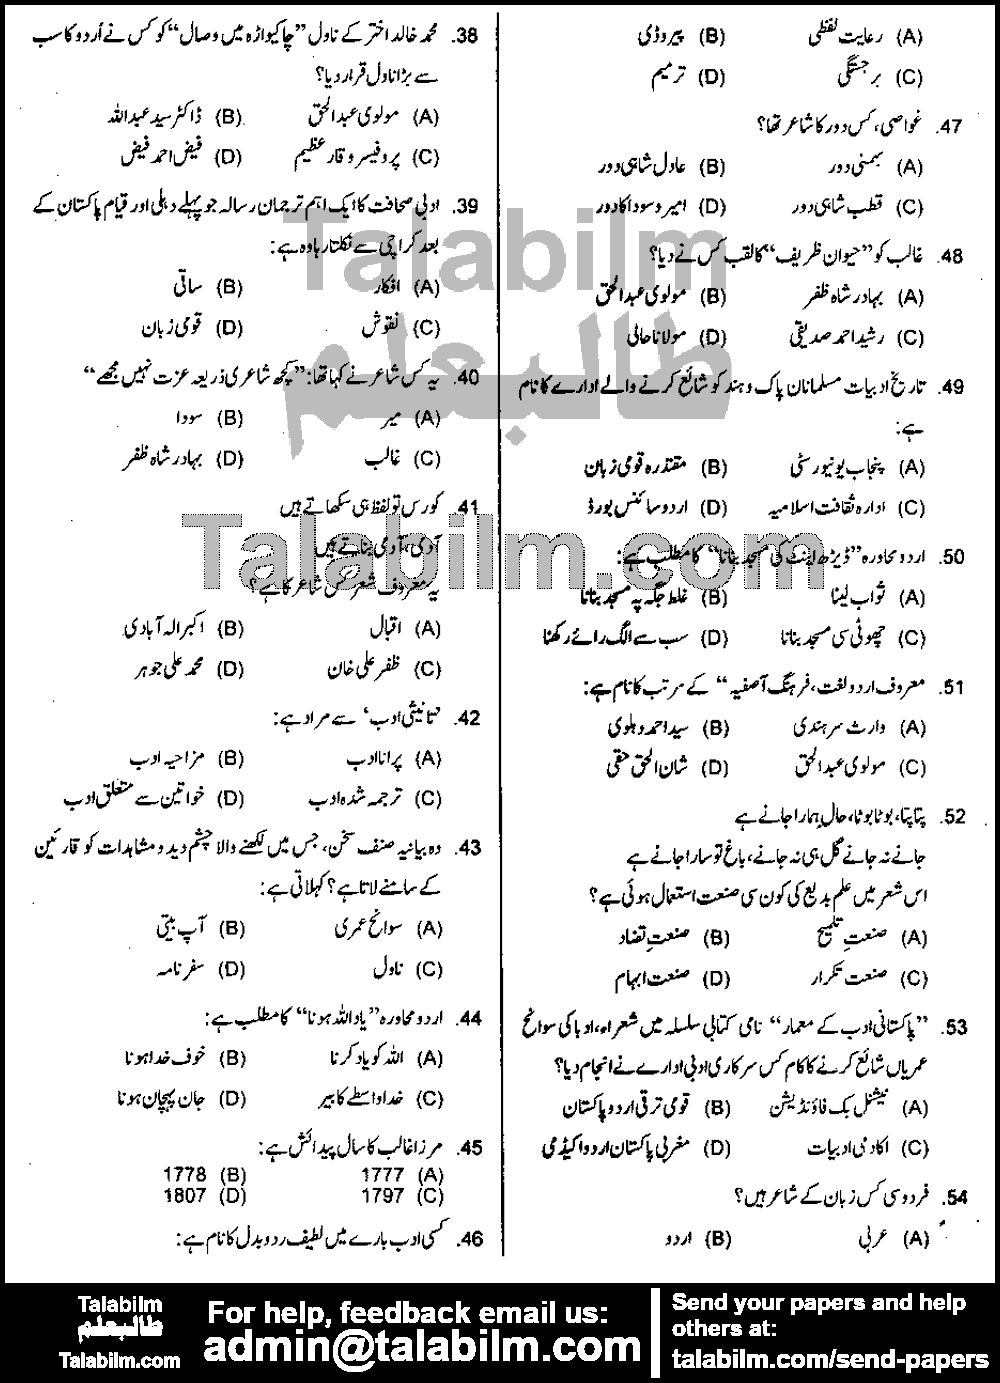 Urdu Elementary School Educator 0 past paper for 2019 Page No. 3